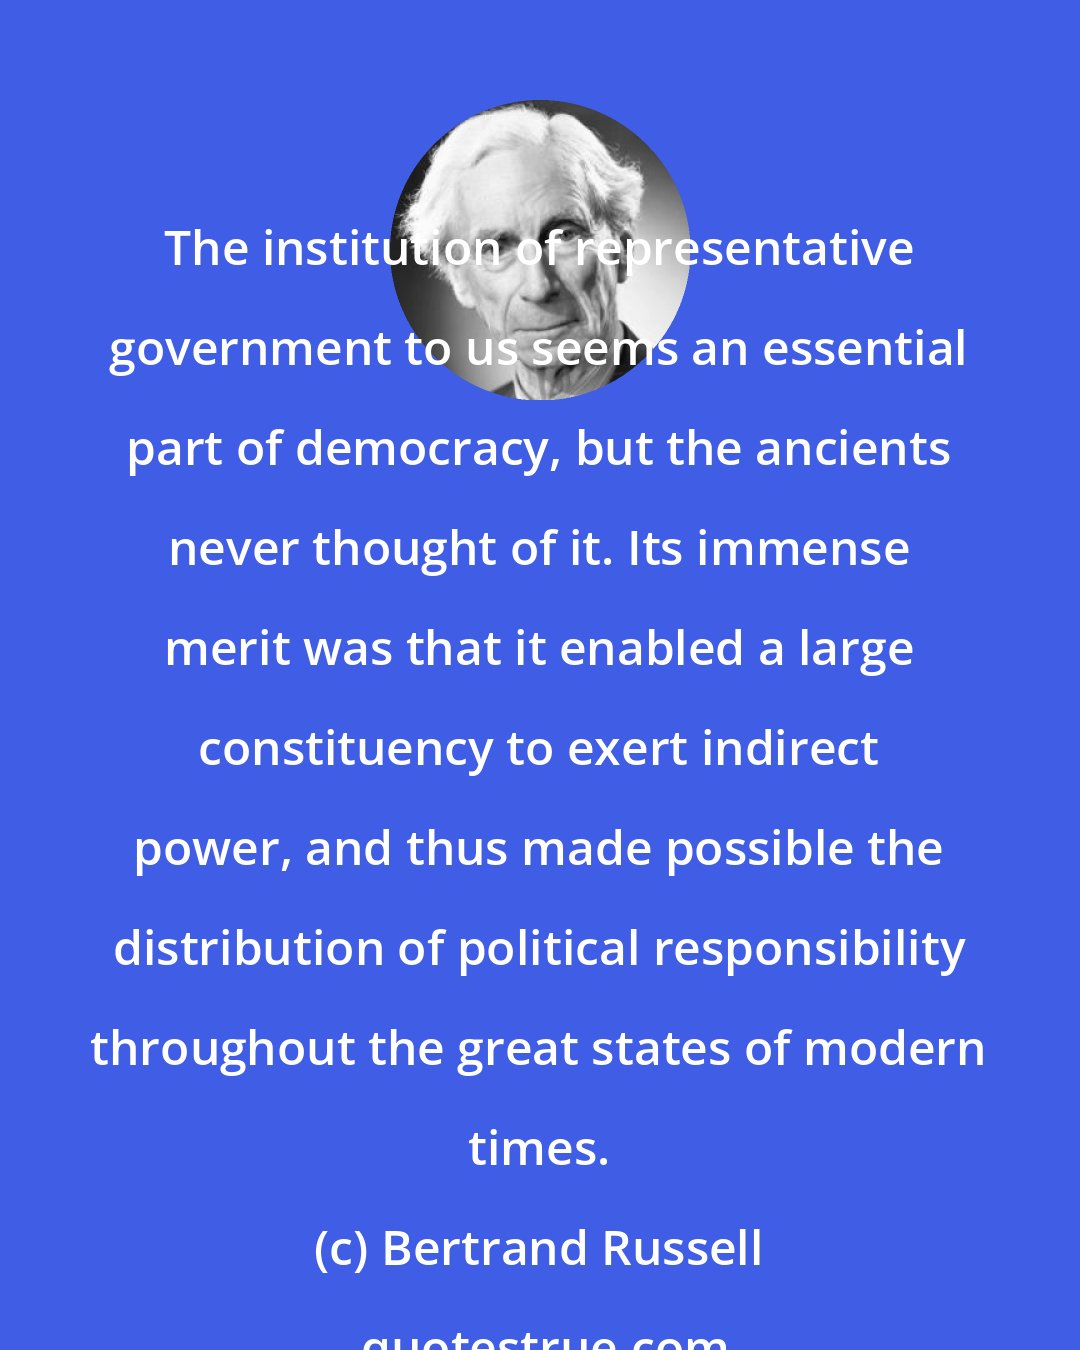 Bertrand Russell: The institution of representative government to us seems an essential part of democracy, but the ancients never thought of it. Its immense merit was that it enabled a large constituency to exert indirect power, and thus made possible the distribution of political responsibility throughout the great states of modern times.